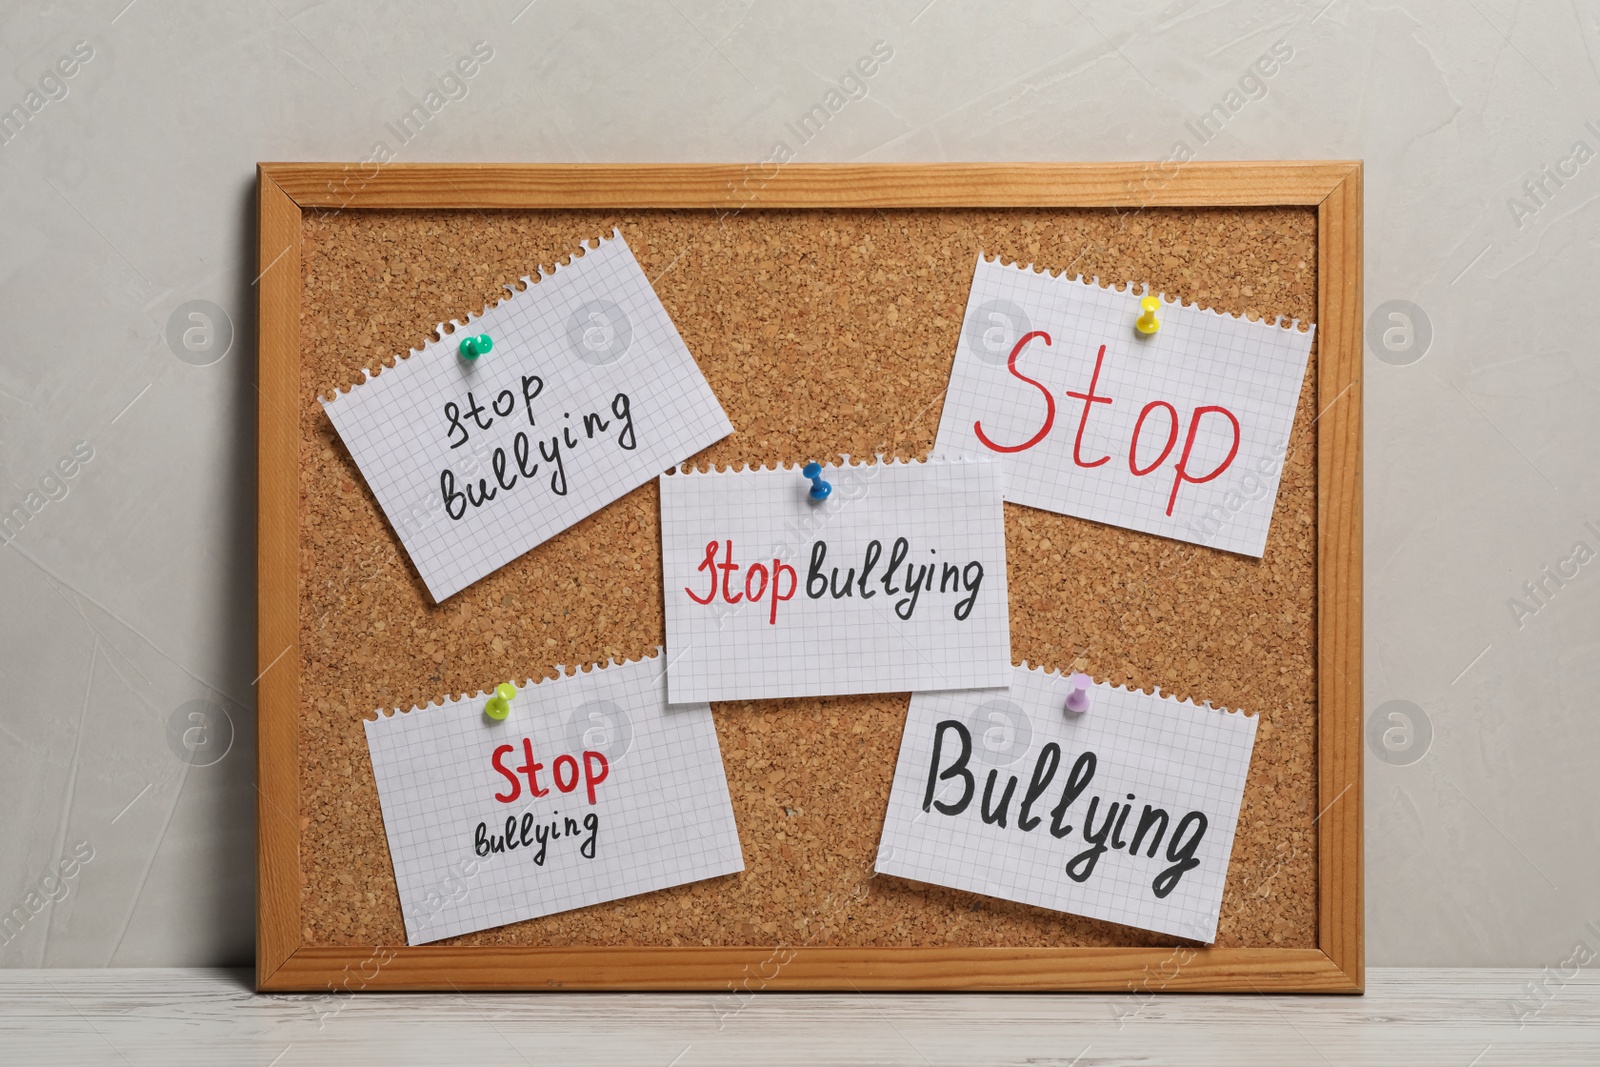 Photo of Notes with phrase Stop Bullying pinned to cork board on table near grey wall